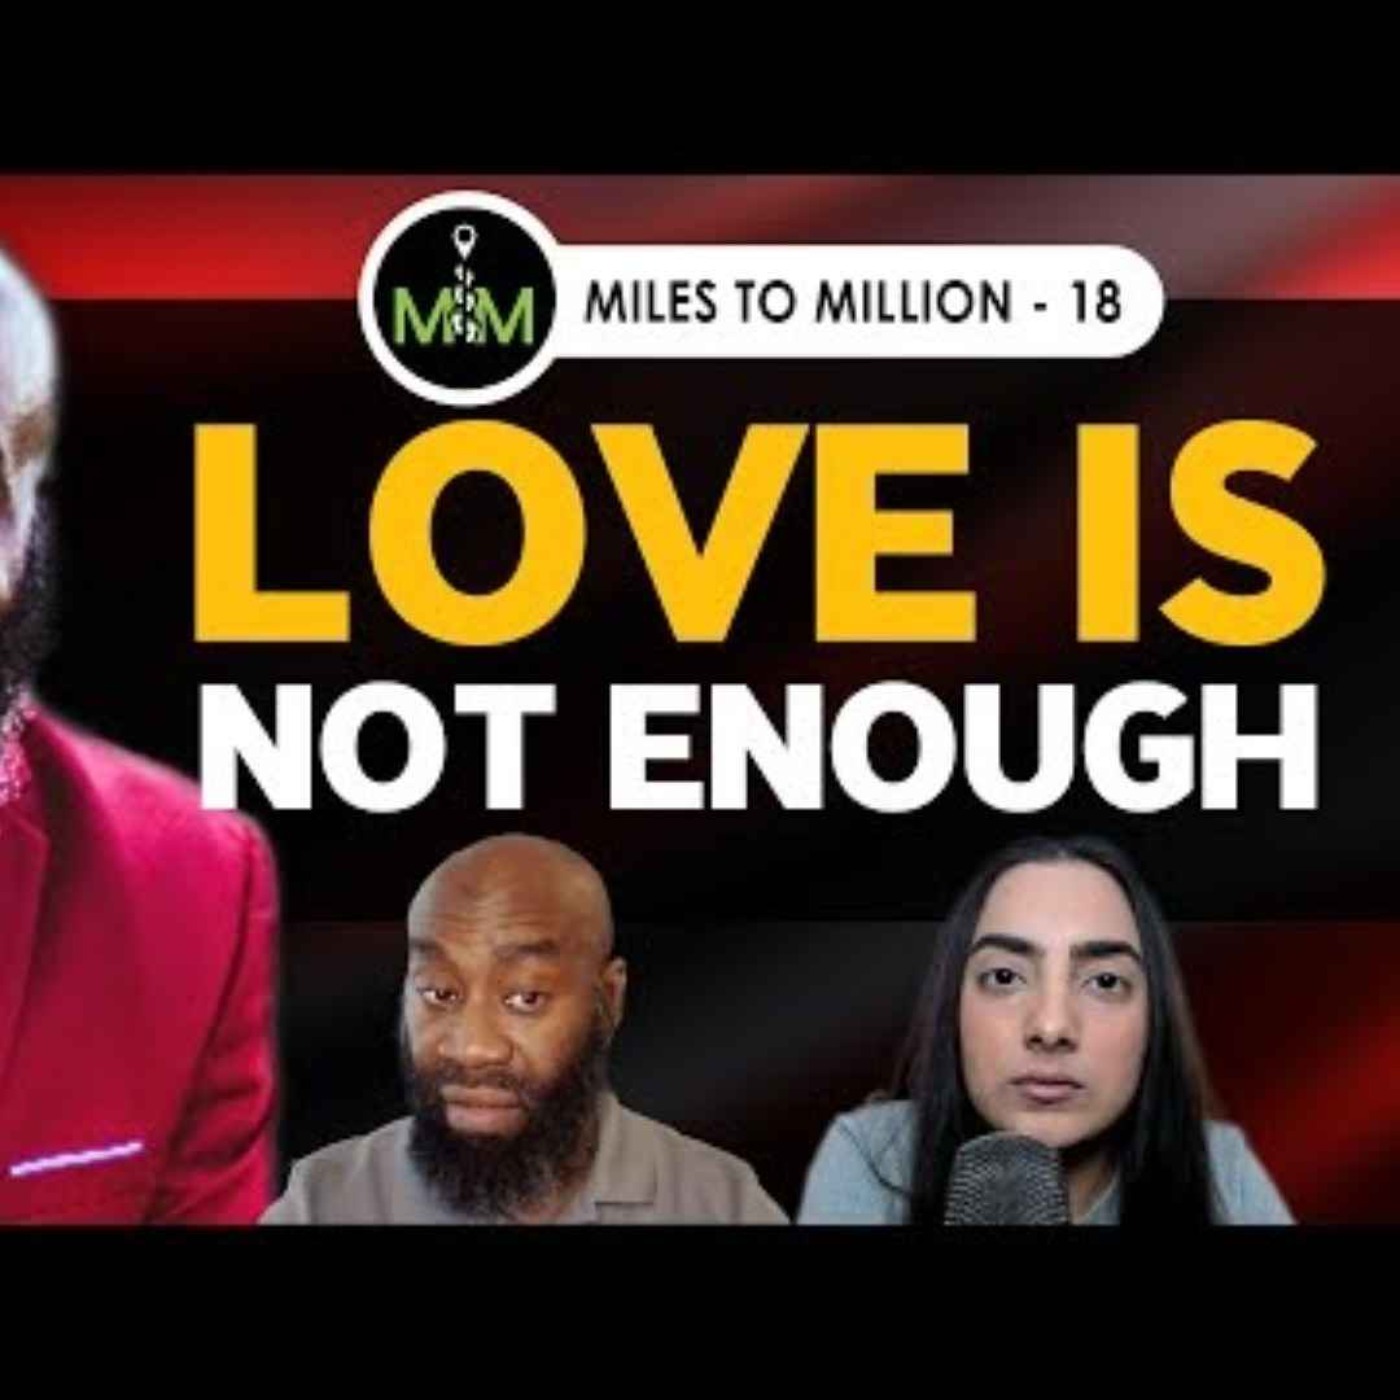 Louis Morris’ appearance on the Miles To Million Podcast with Host Karan Marwah